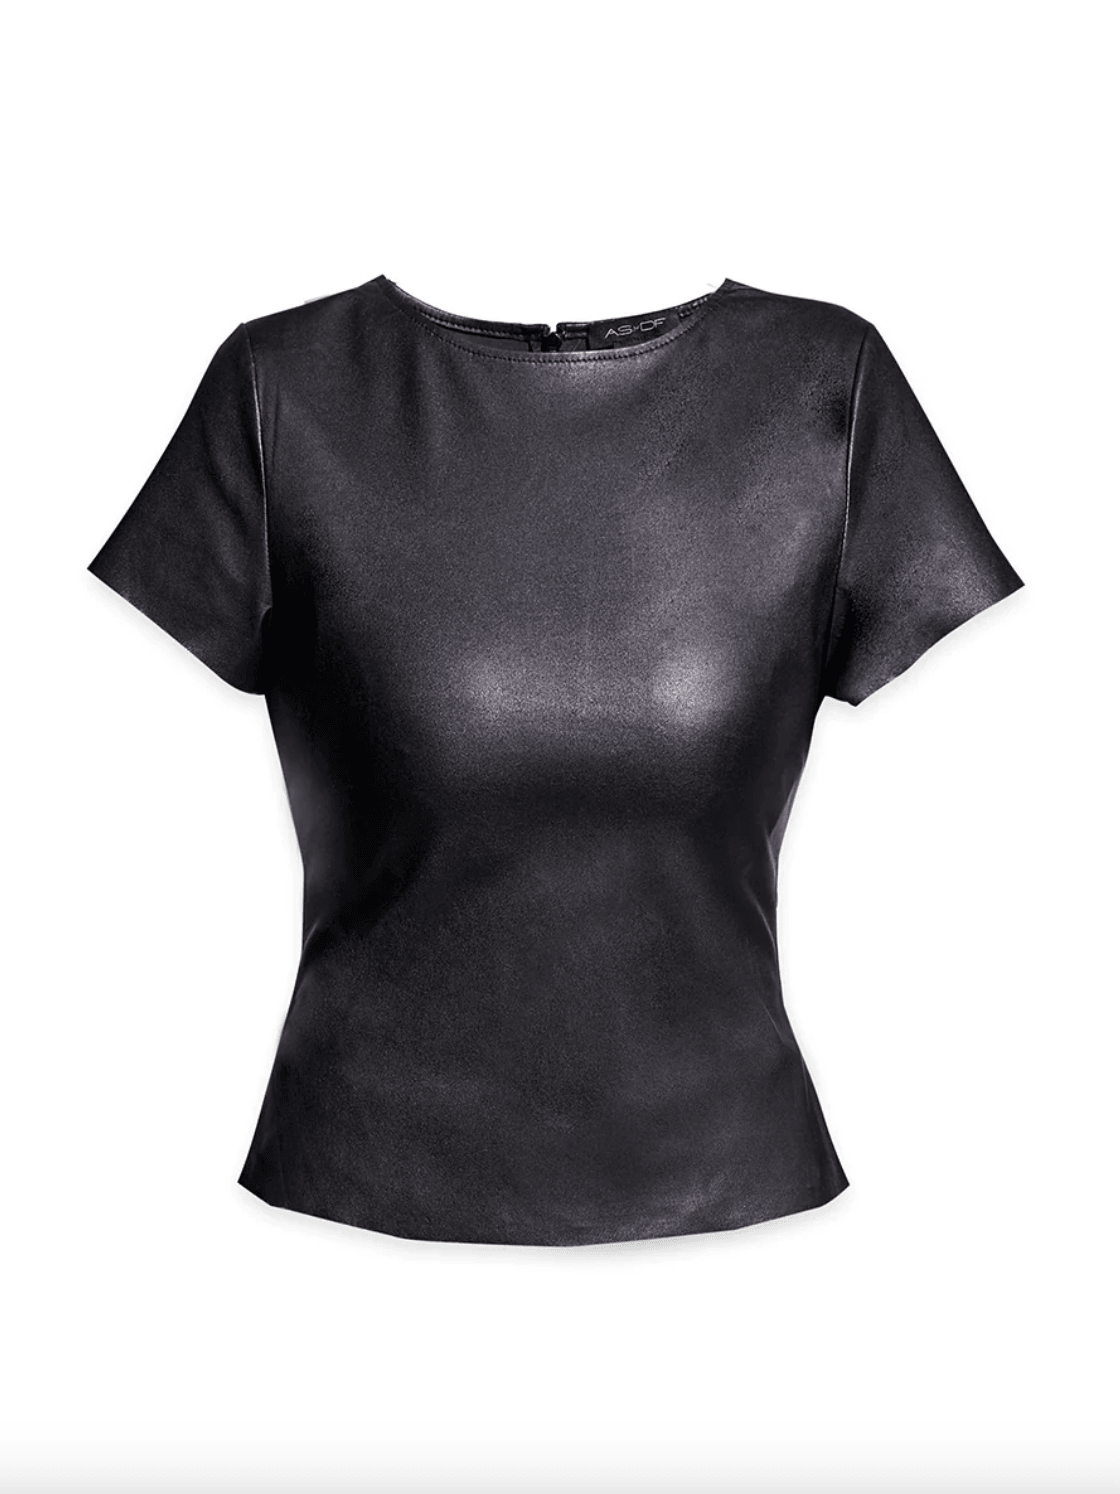 Brando Stretch Leather Shirt by As by DF - Haven